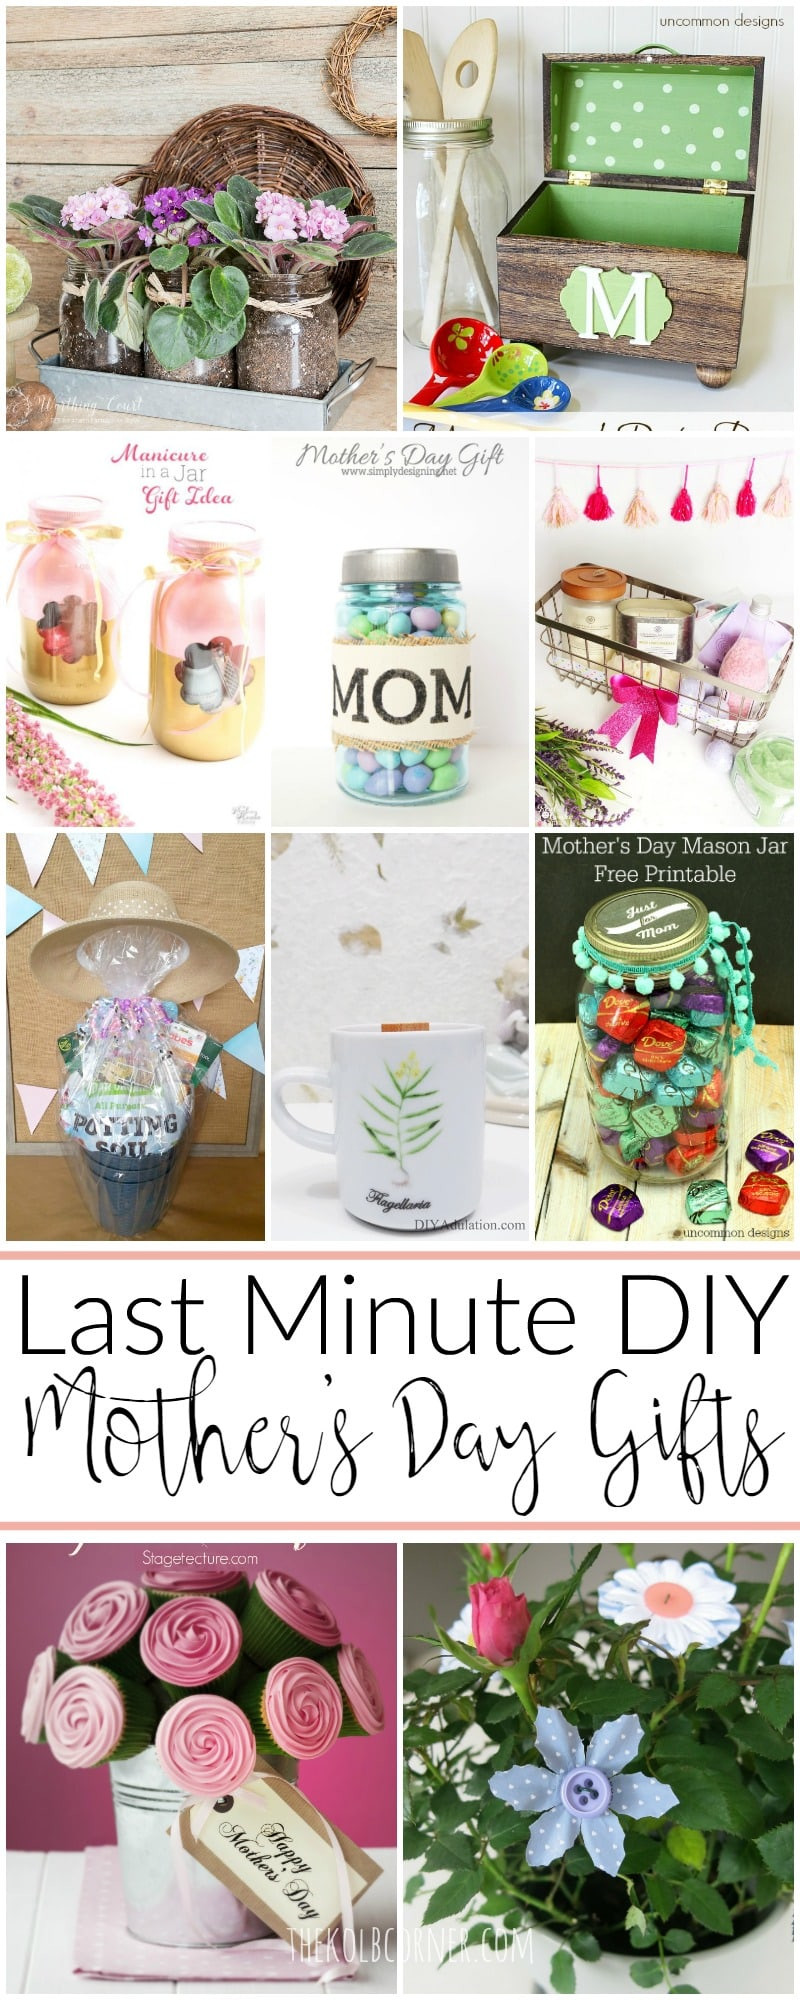 Last Minute Mothers Day Gift Ideas
 Last Minute DIY Mother s Day Gift Ideas